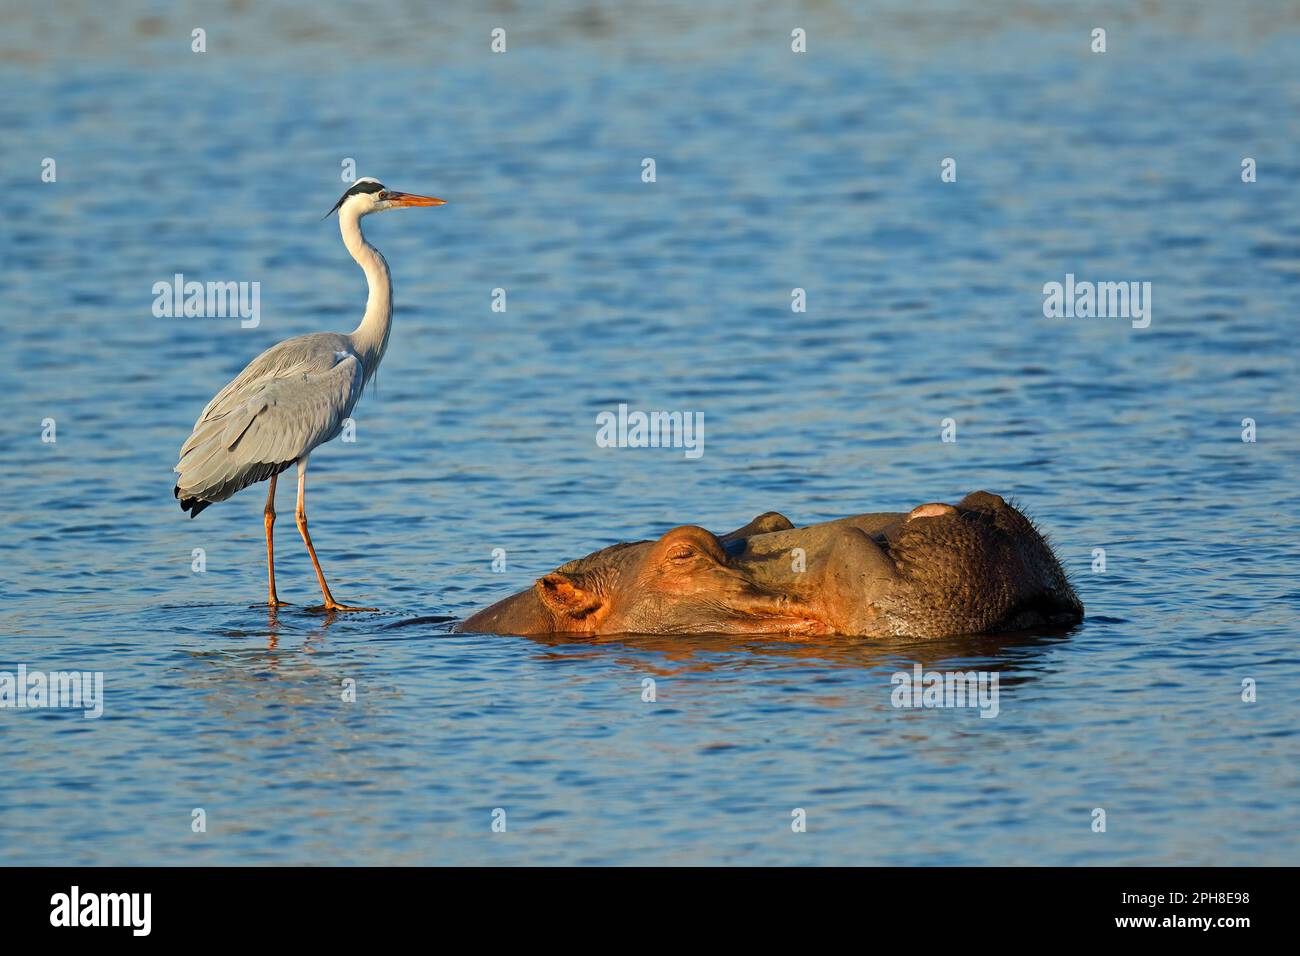 Grey heron (Ardea cinerea) standing on a submerged hippo, Kruger National Park, South Africa Stock Photo